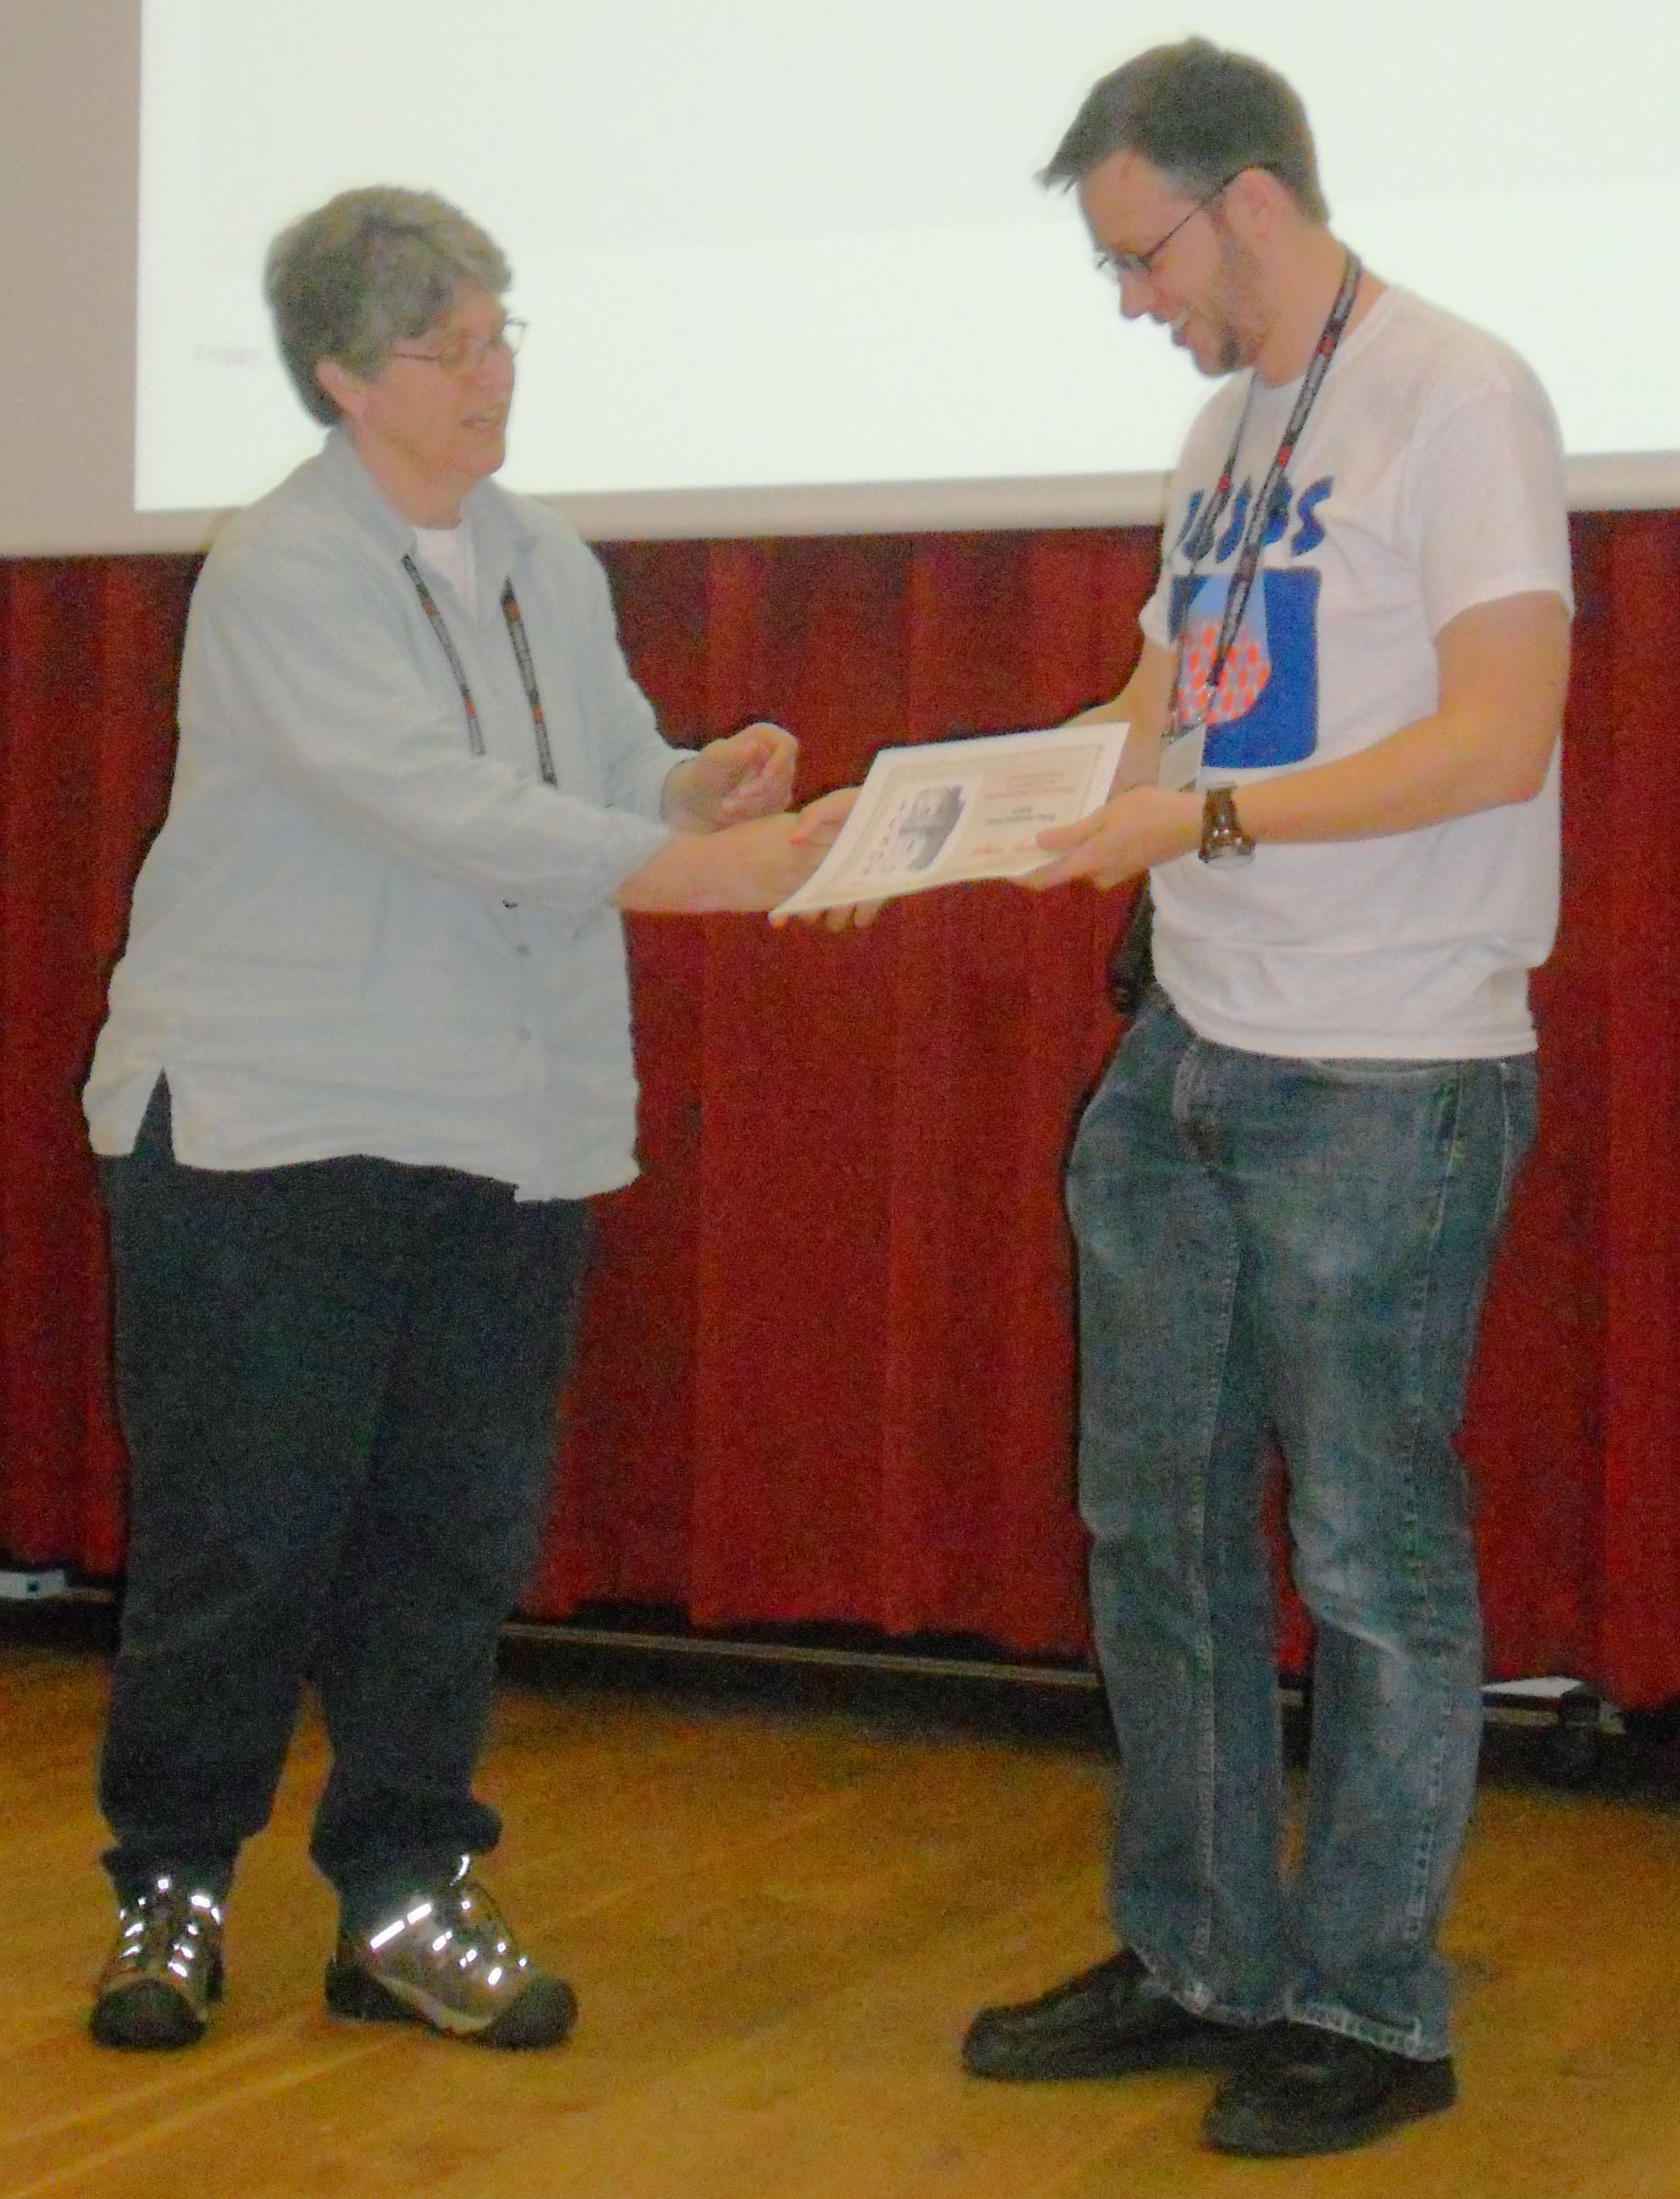 Sam Jarvis wins Young Scientist prize at ICSOS-11